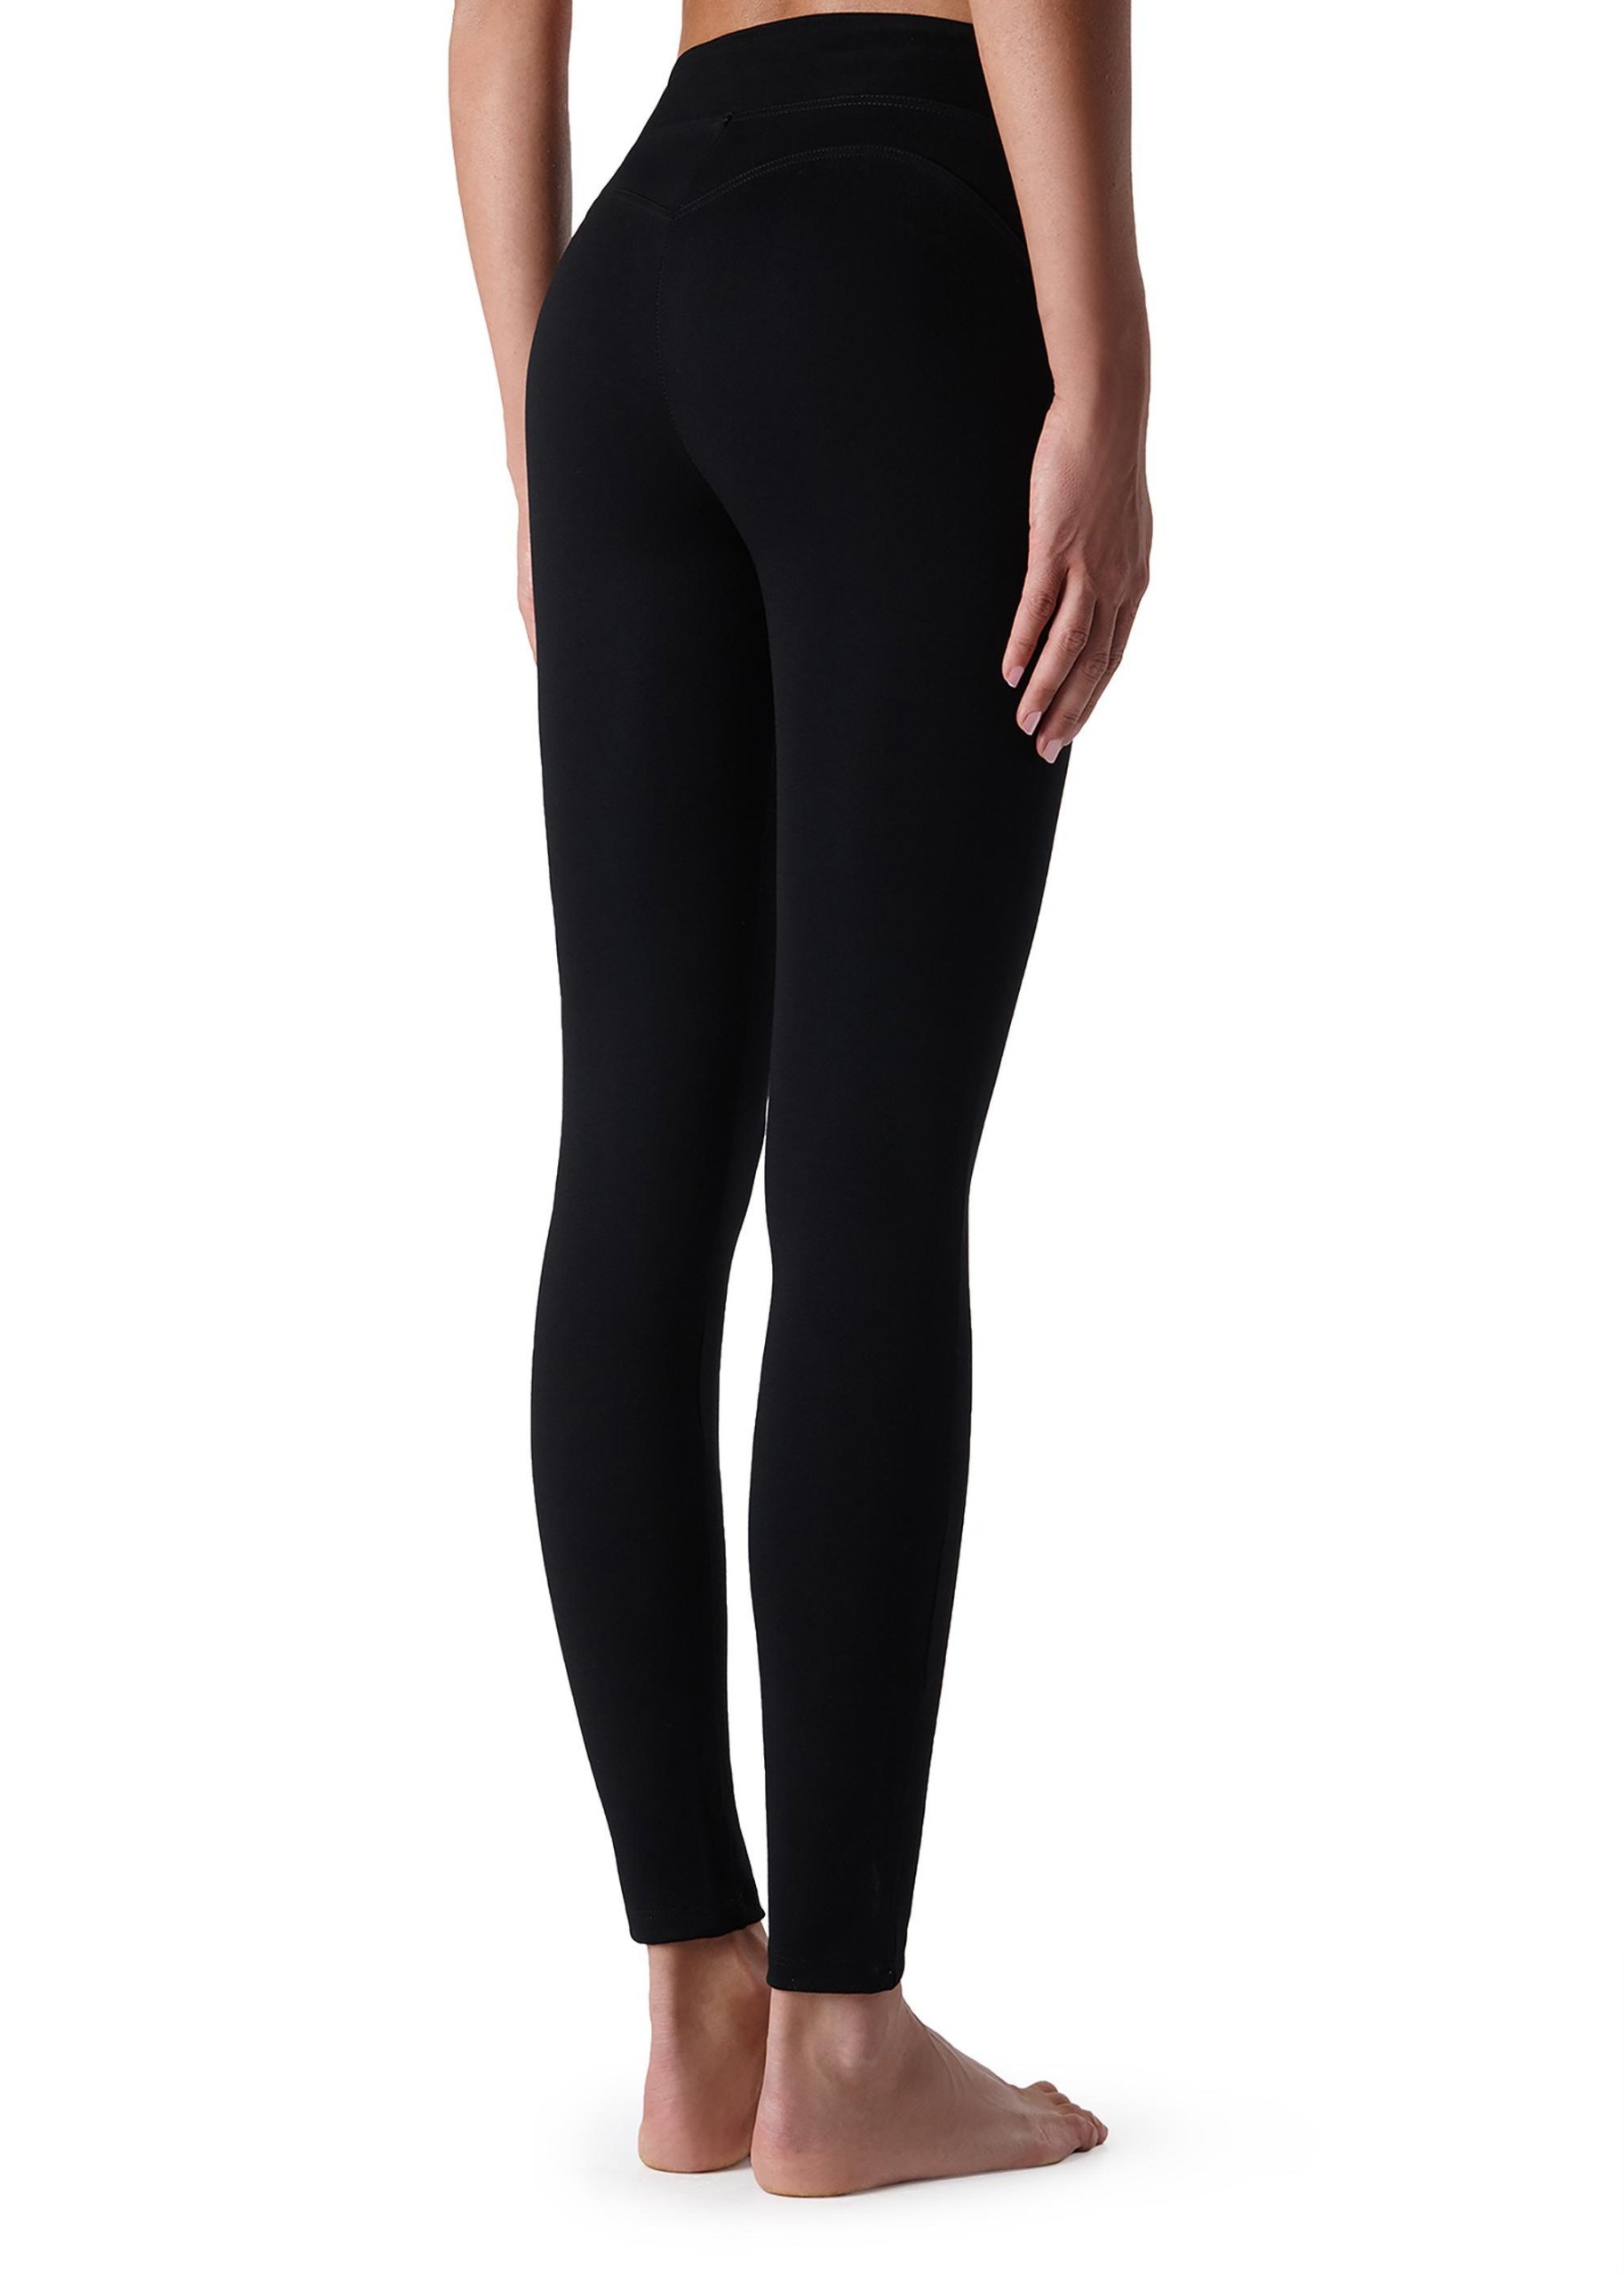 Leggings Push Up Calzedonia Jeans With